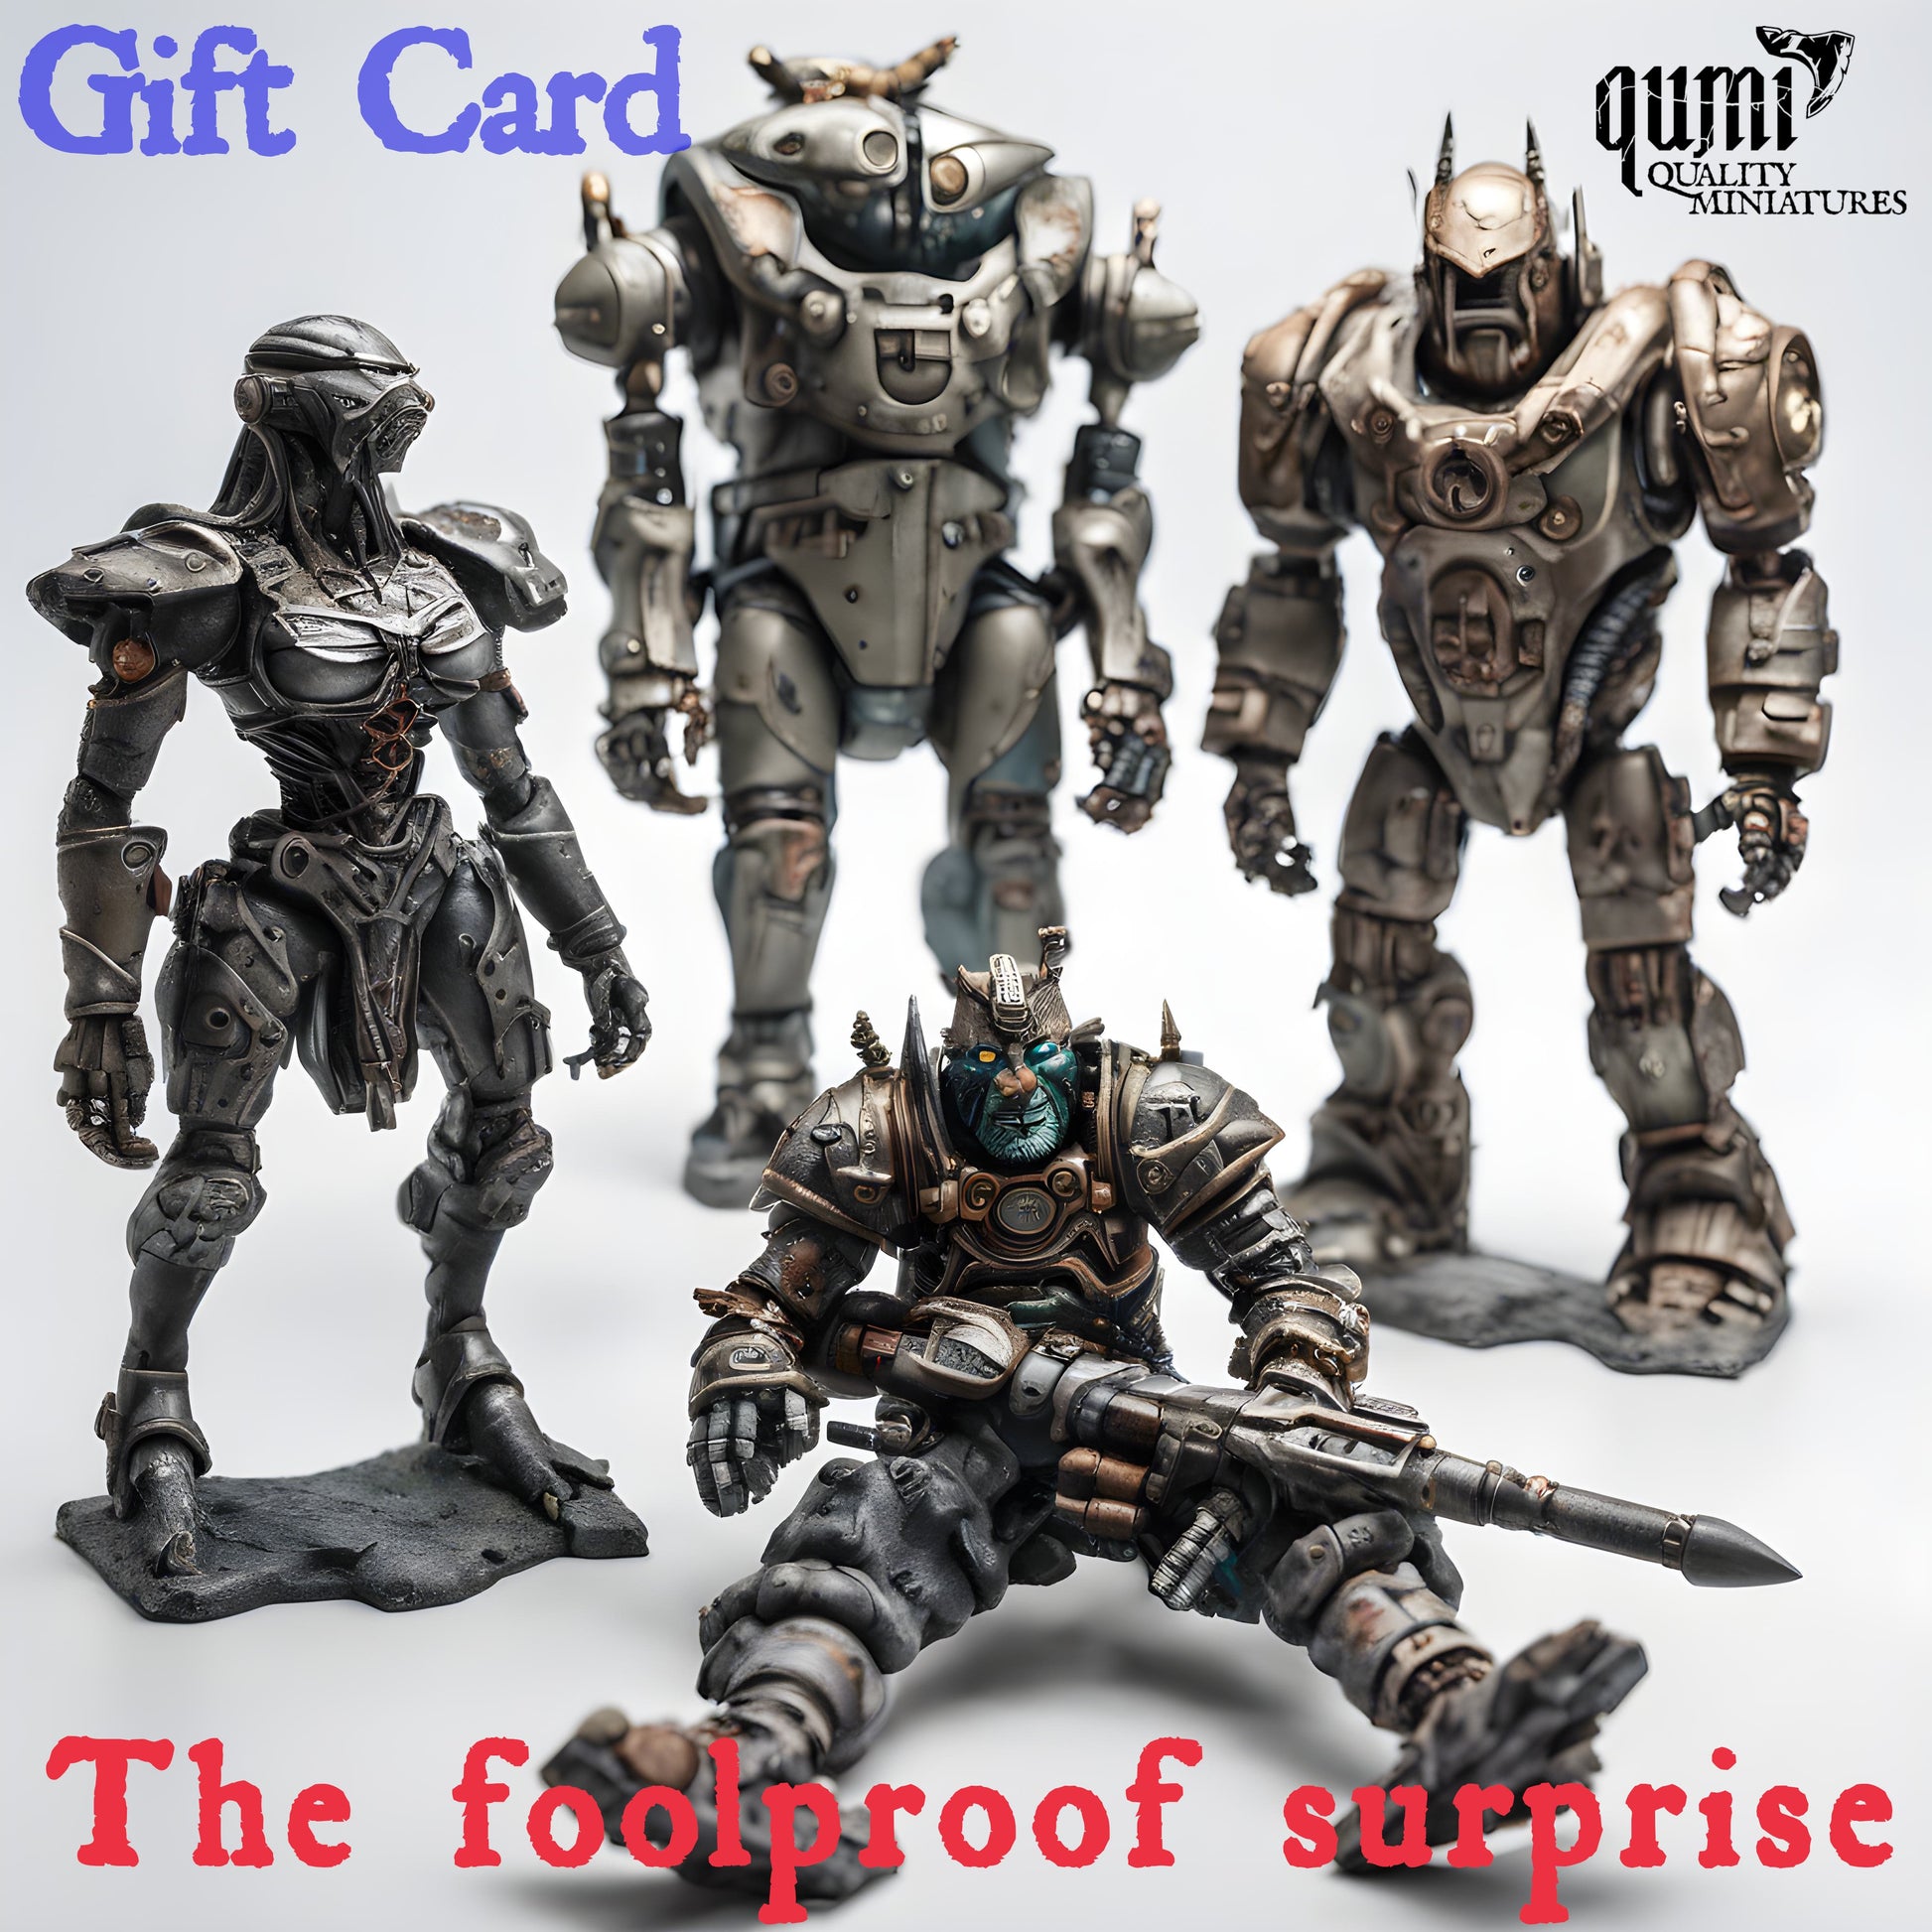 Foolproof Gift Card - you don't know what to gift? - Quality Miniatures - Qumi